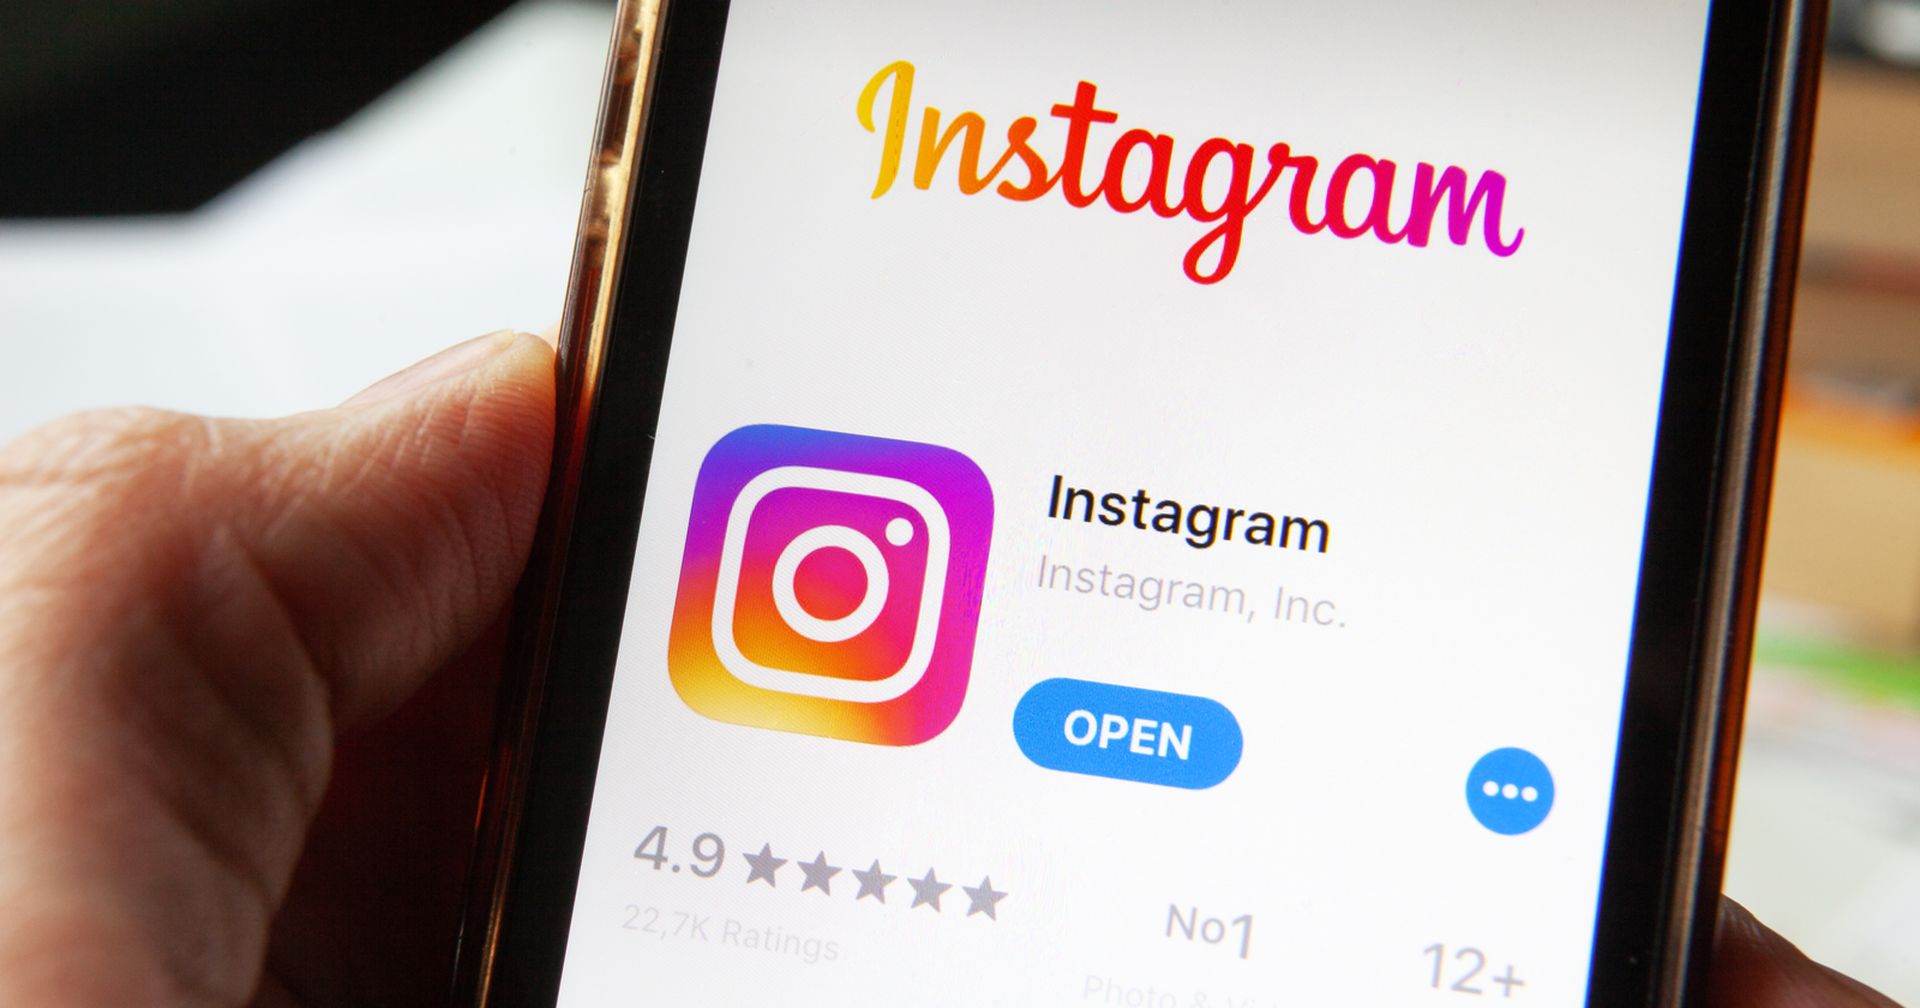 Looking for some Funny notes on Instagram? You've come to the right place. We've compiled a massive collection of the best funny notes on Instagram to use....